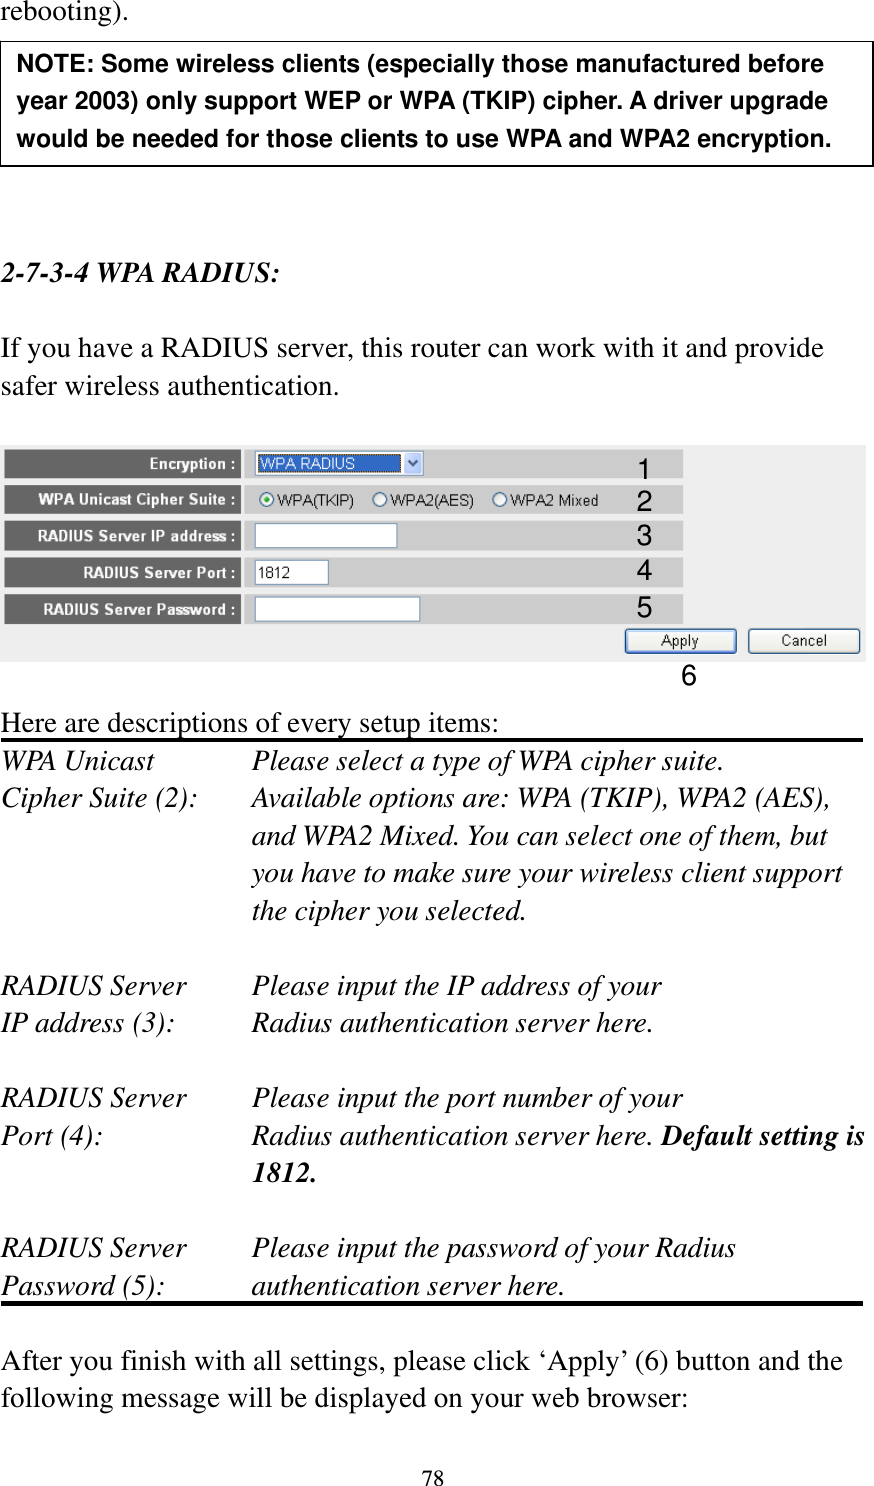 78 rebooting).       2-7-3-4 WPA RADIUS:  If you have a RADIUS server, this router can work with it and provide safer wireless authentication.    Here are descriptions of every setup items: WPA Unicast      Please select a type of WPA cipher suite. Cipher Suite (2):  Available options are: WPA (TKIP), WPA2 (AES), and WPA2 Mixed. You can select one of them, but you have to make sure your wireless client support the cipher you selected.  RADIUS Server     Please input the IP address of your IP address (3):      Radius authentication server here.  RADIUS Server     Please input the port number of your Port (4):    Radius authentication server here. Default setting is 1812.  RADIUS Server     Please input the password of your Radius Password (5):    authentication server here.  After you finish with all settings, please click ‘Apply’ (6) button and the following message will be displayed on your web browser: NOTE: Some wireless clients (especially those manufactured before year 2003) only support WEP or WPA (TKIP) cipher. A driver upgrade would be needed for those clients to use WPA and WPA2 encryption. 13 4 2 5 6 